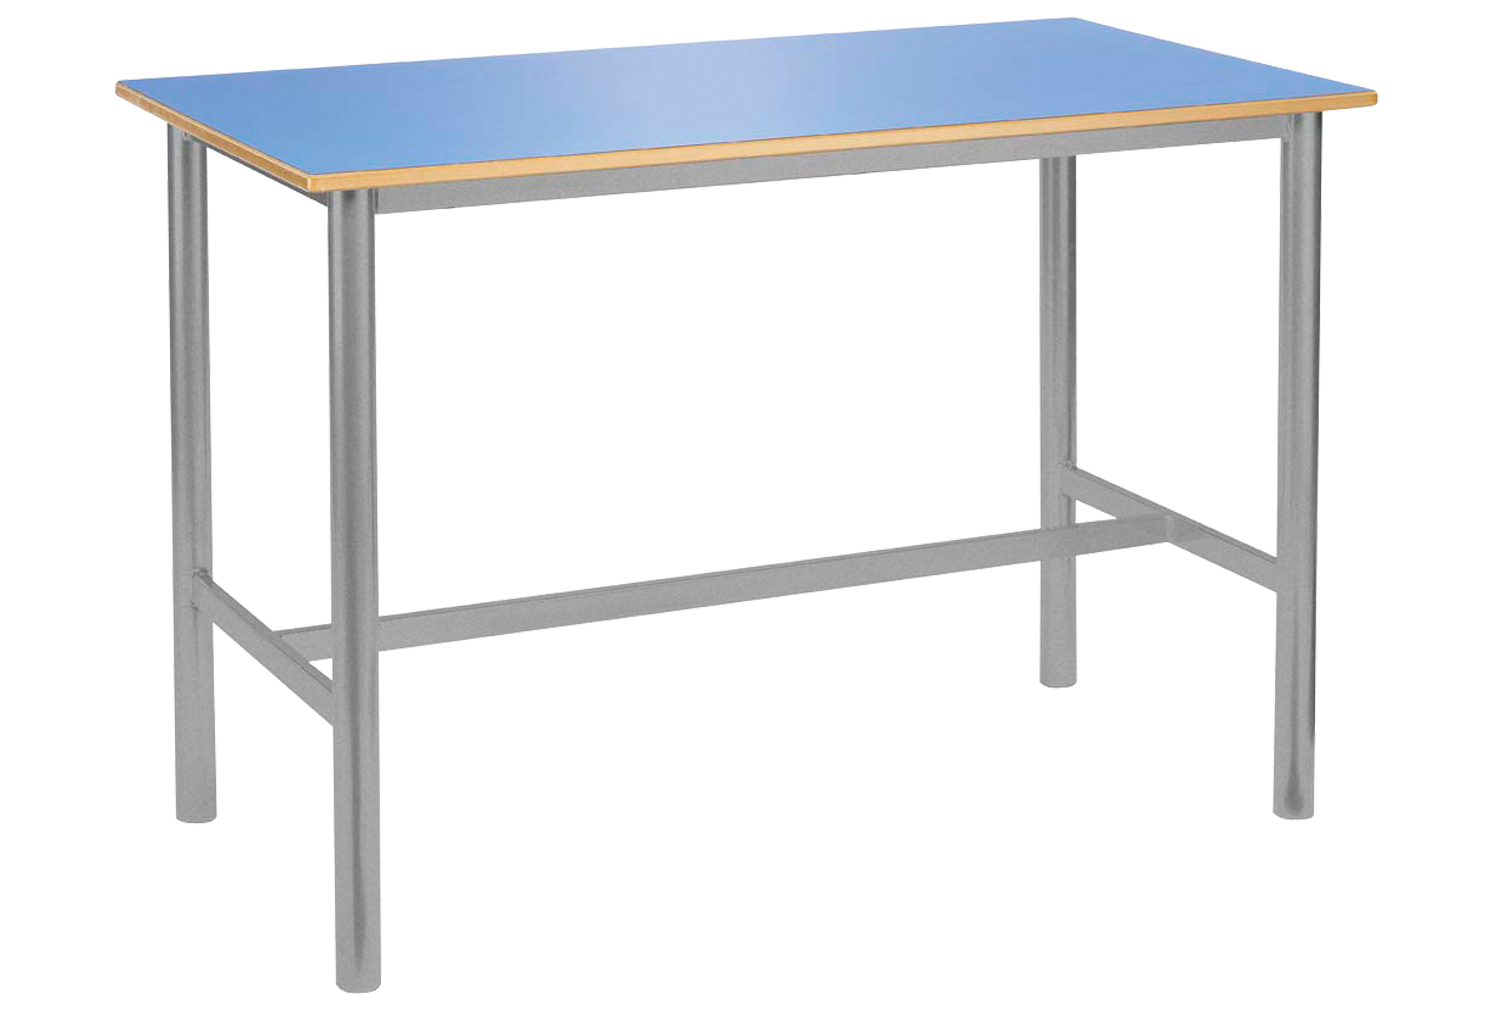 Qty 2 - Premium Fully Welded Craft Tables 120x60cm, 120wx60dx85h (cm), Light Grey Frame, Grey Top